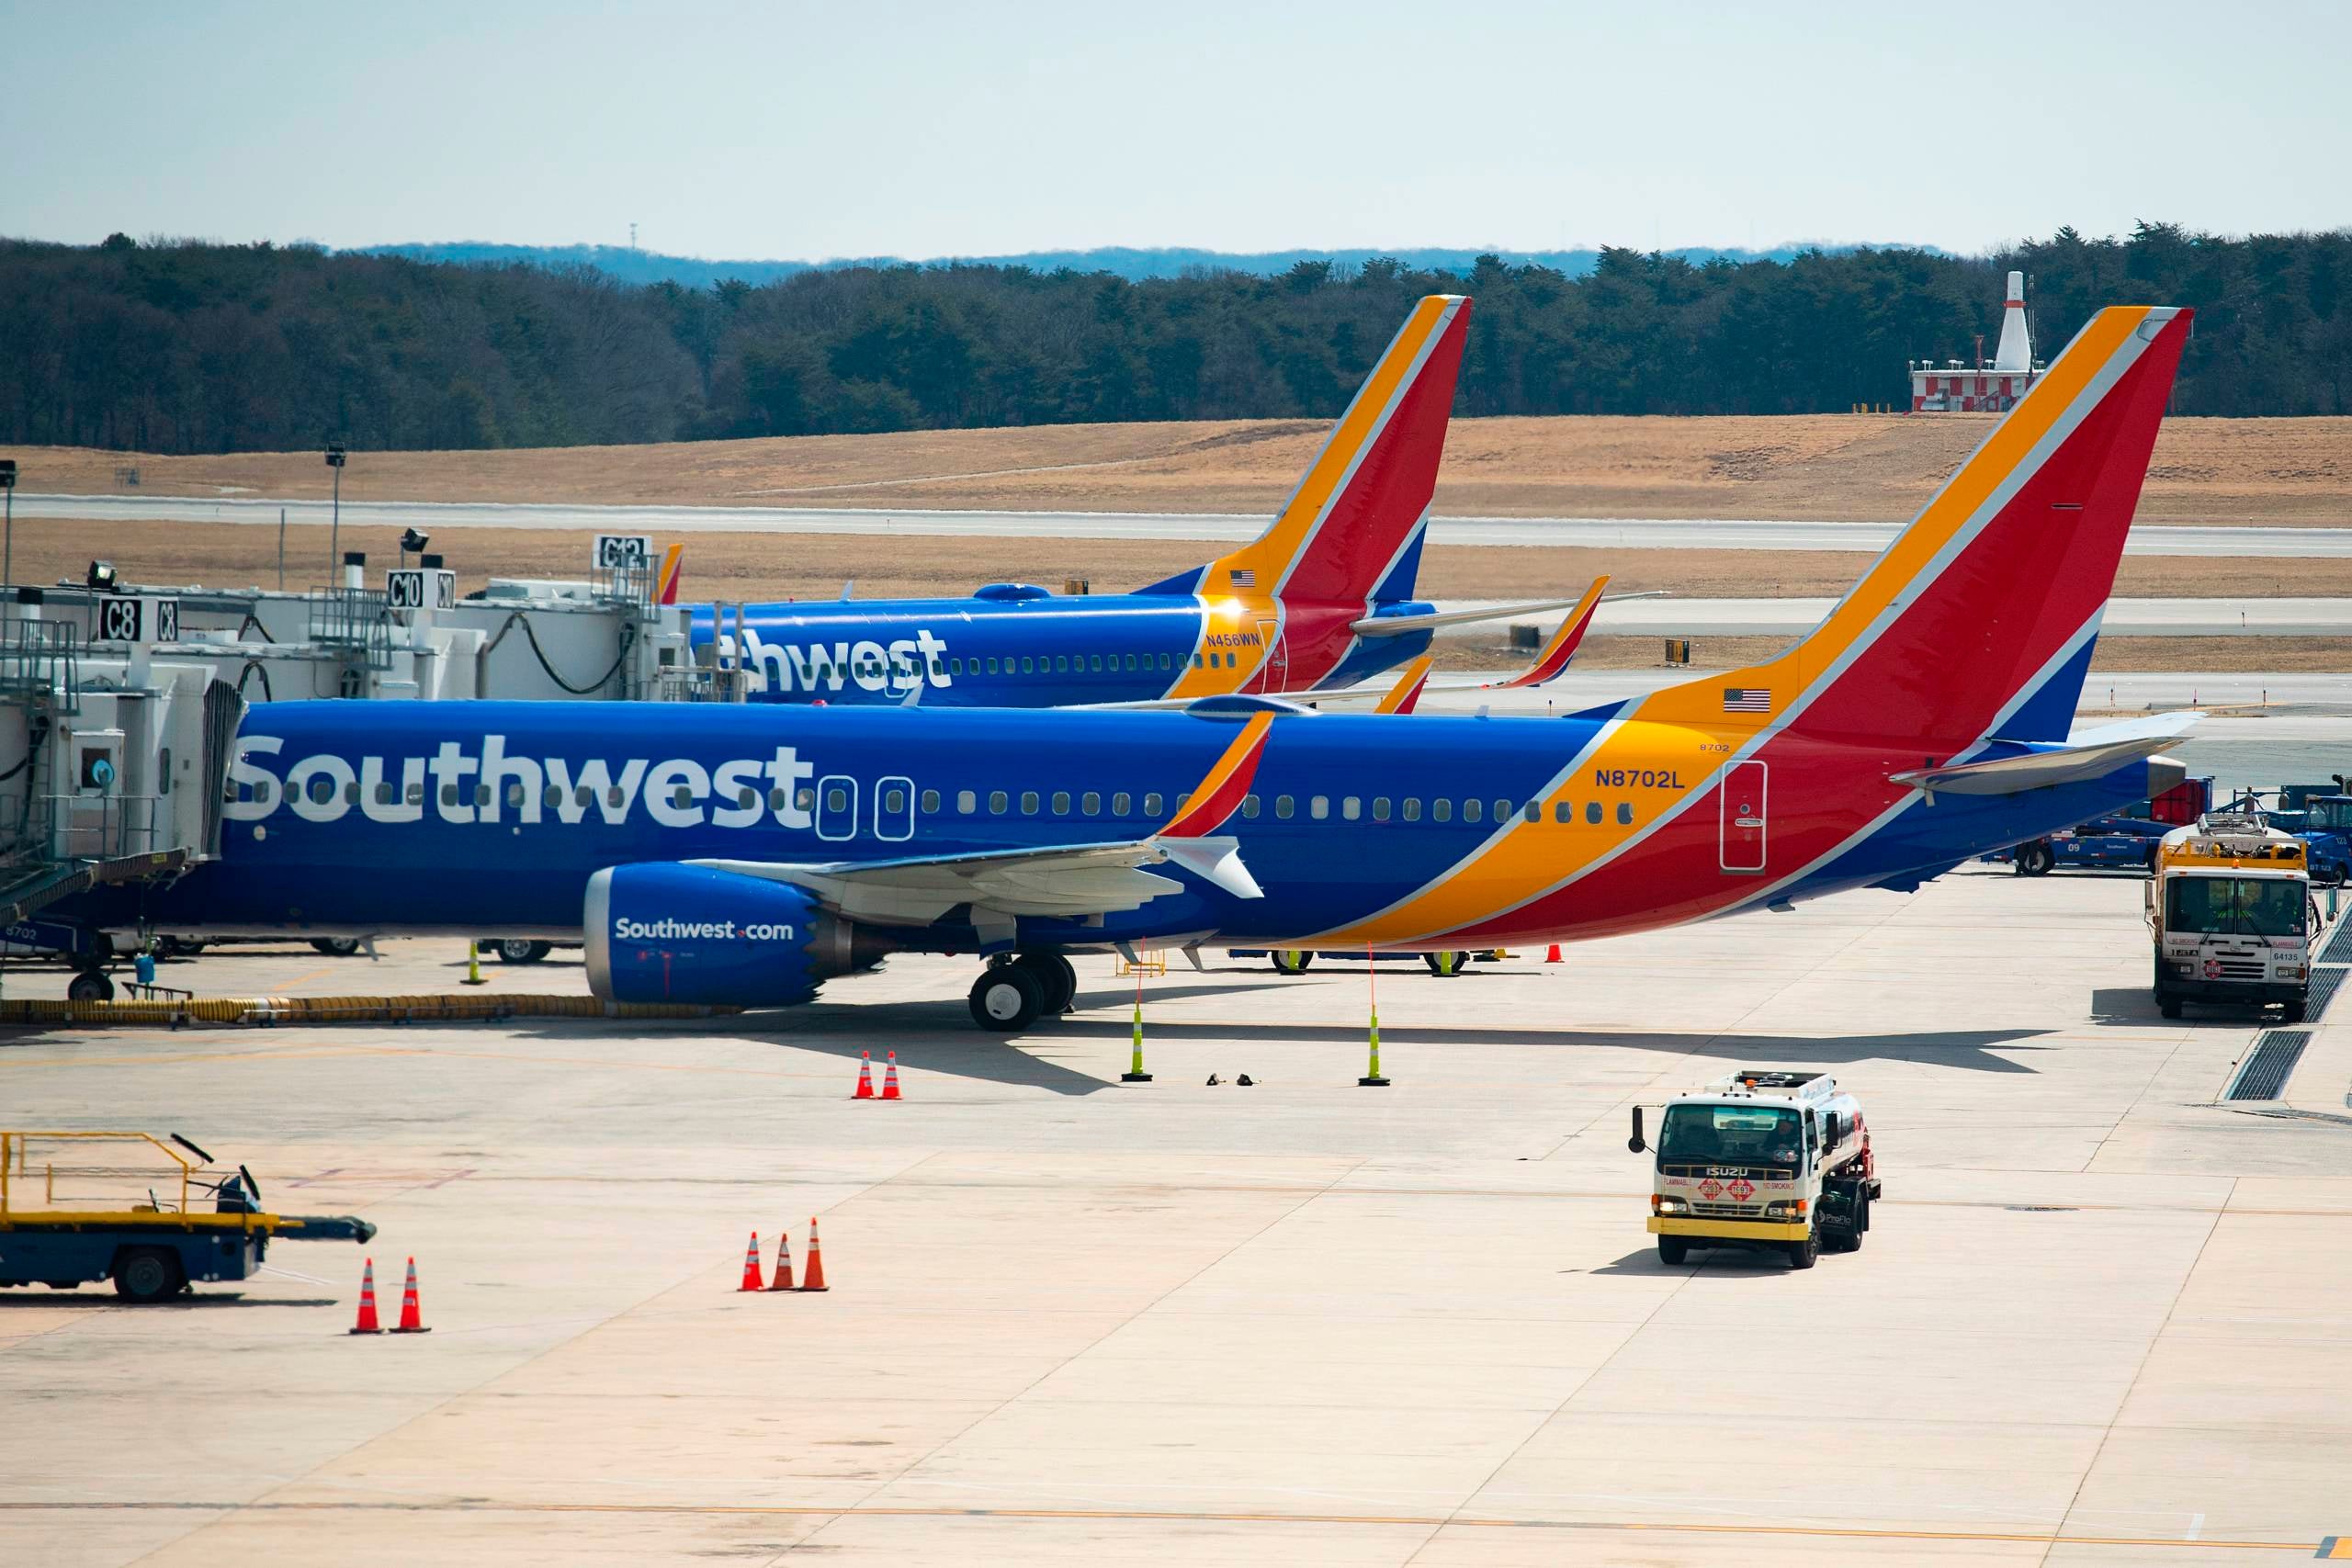 Southwest Airlines planes are parked at boarding gates